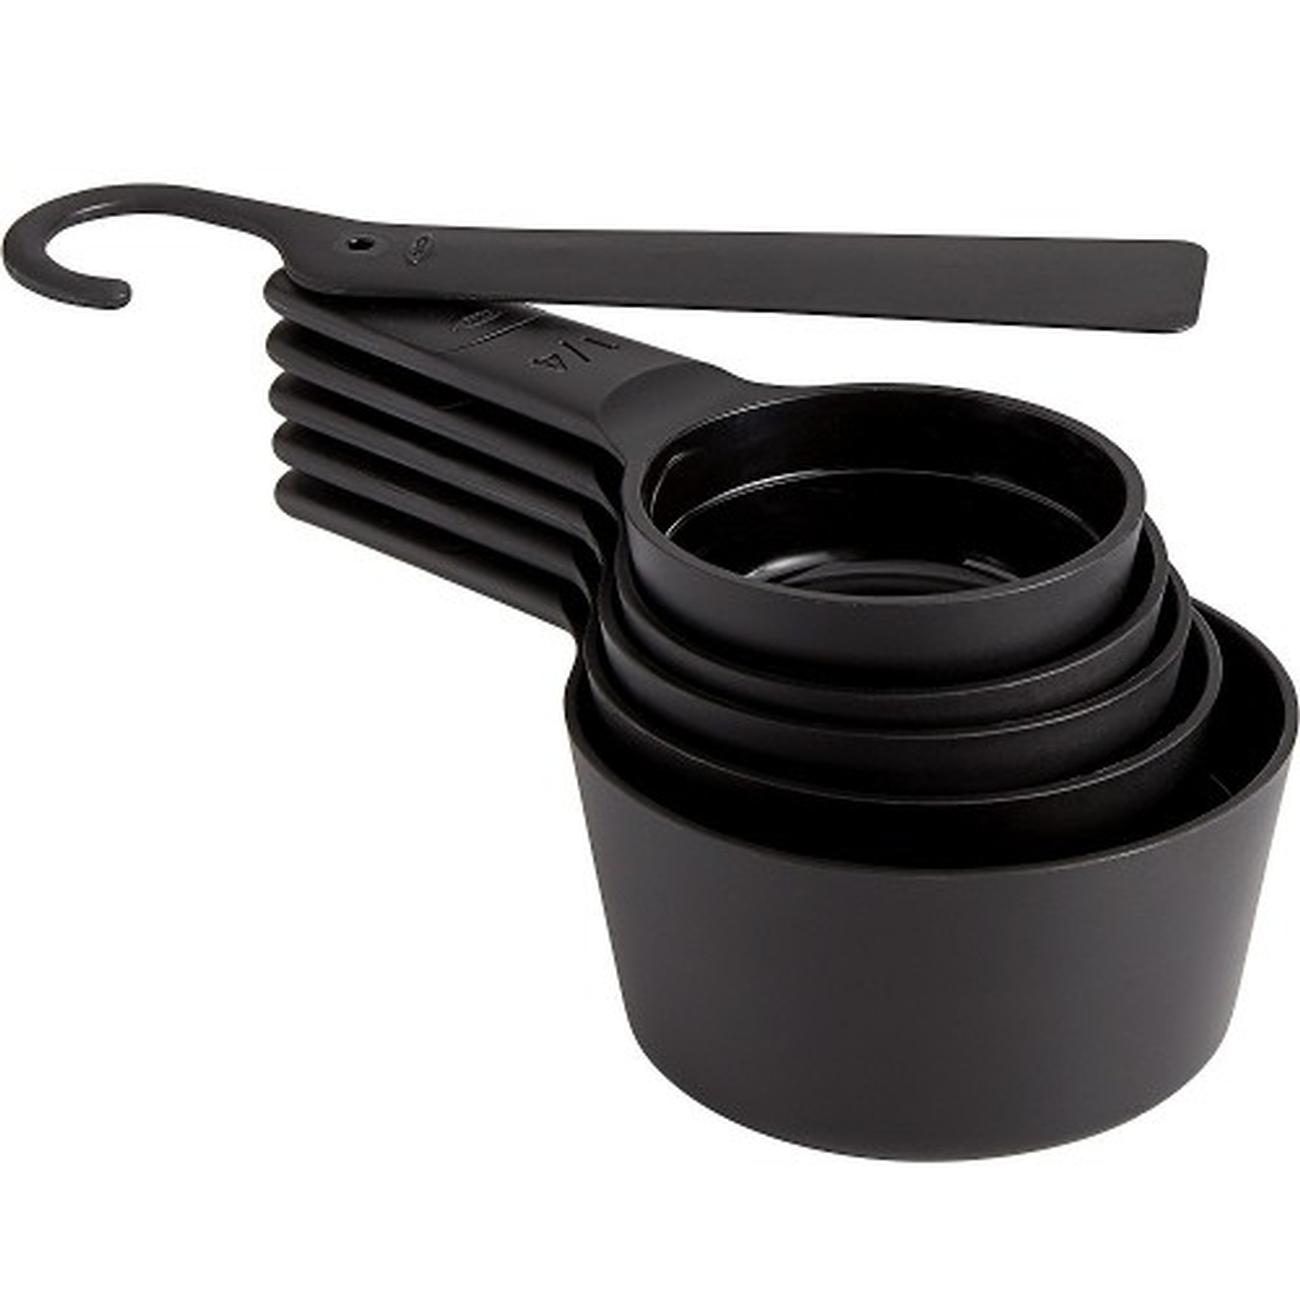 https://www.thekitchenwhisk.ie/contentfiles/productImages/Large/MeasuringCups6pc-Black-2.jpg